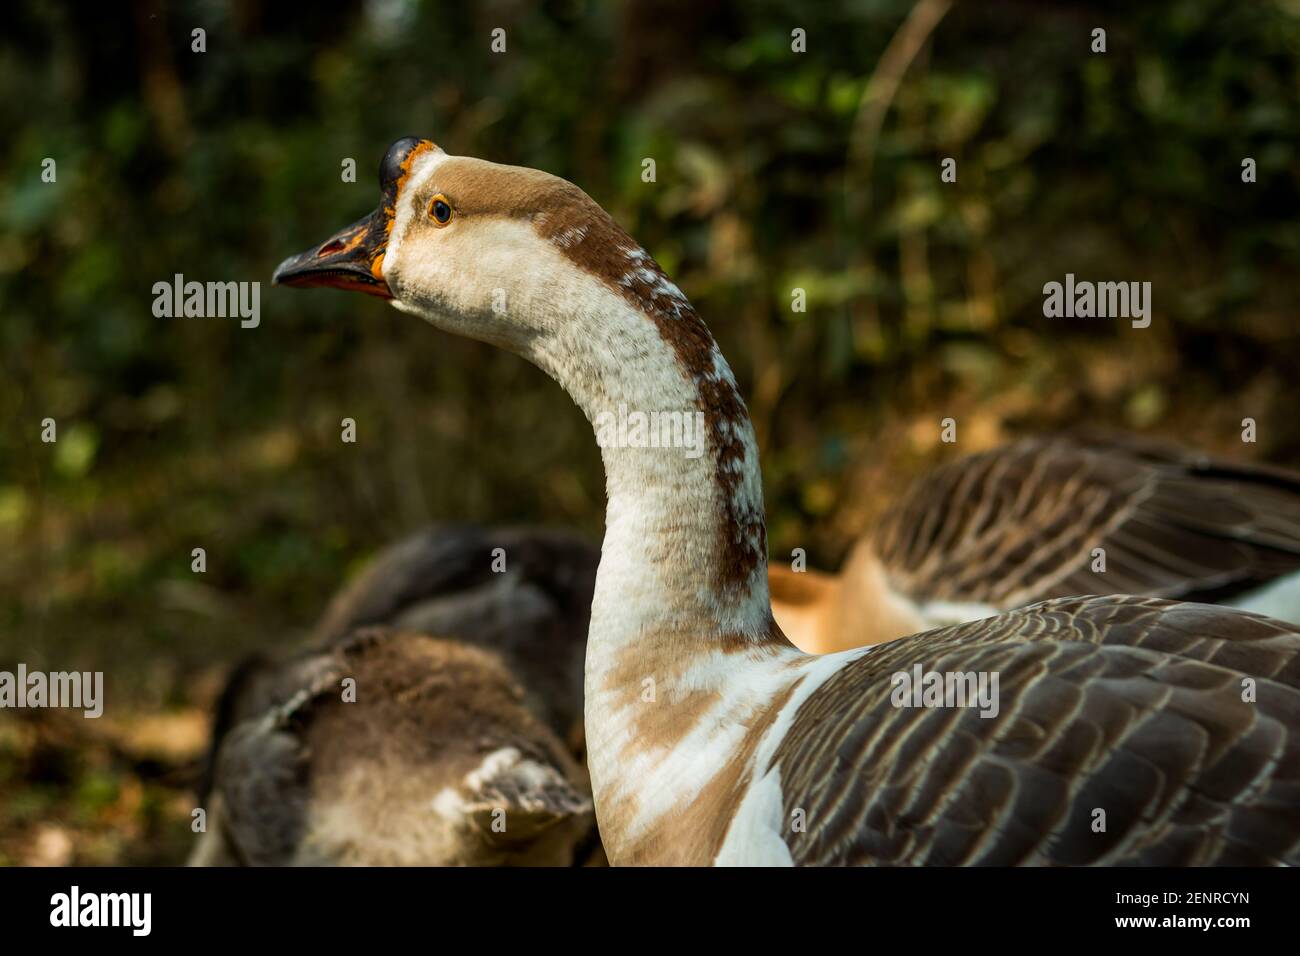 Tribe Stictonettini, Ducks, Geese, and Swans and the Freckled Duck or Stictonetta naevosa, Anserini is a tribe of ducks containing the geese and swans Stock Photo